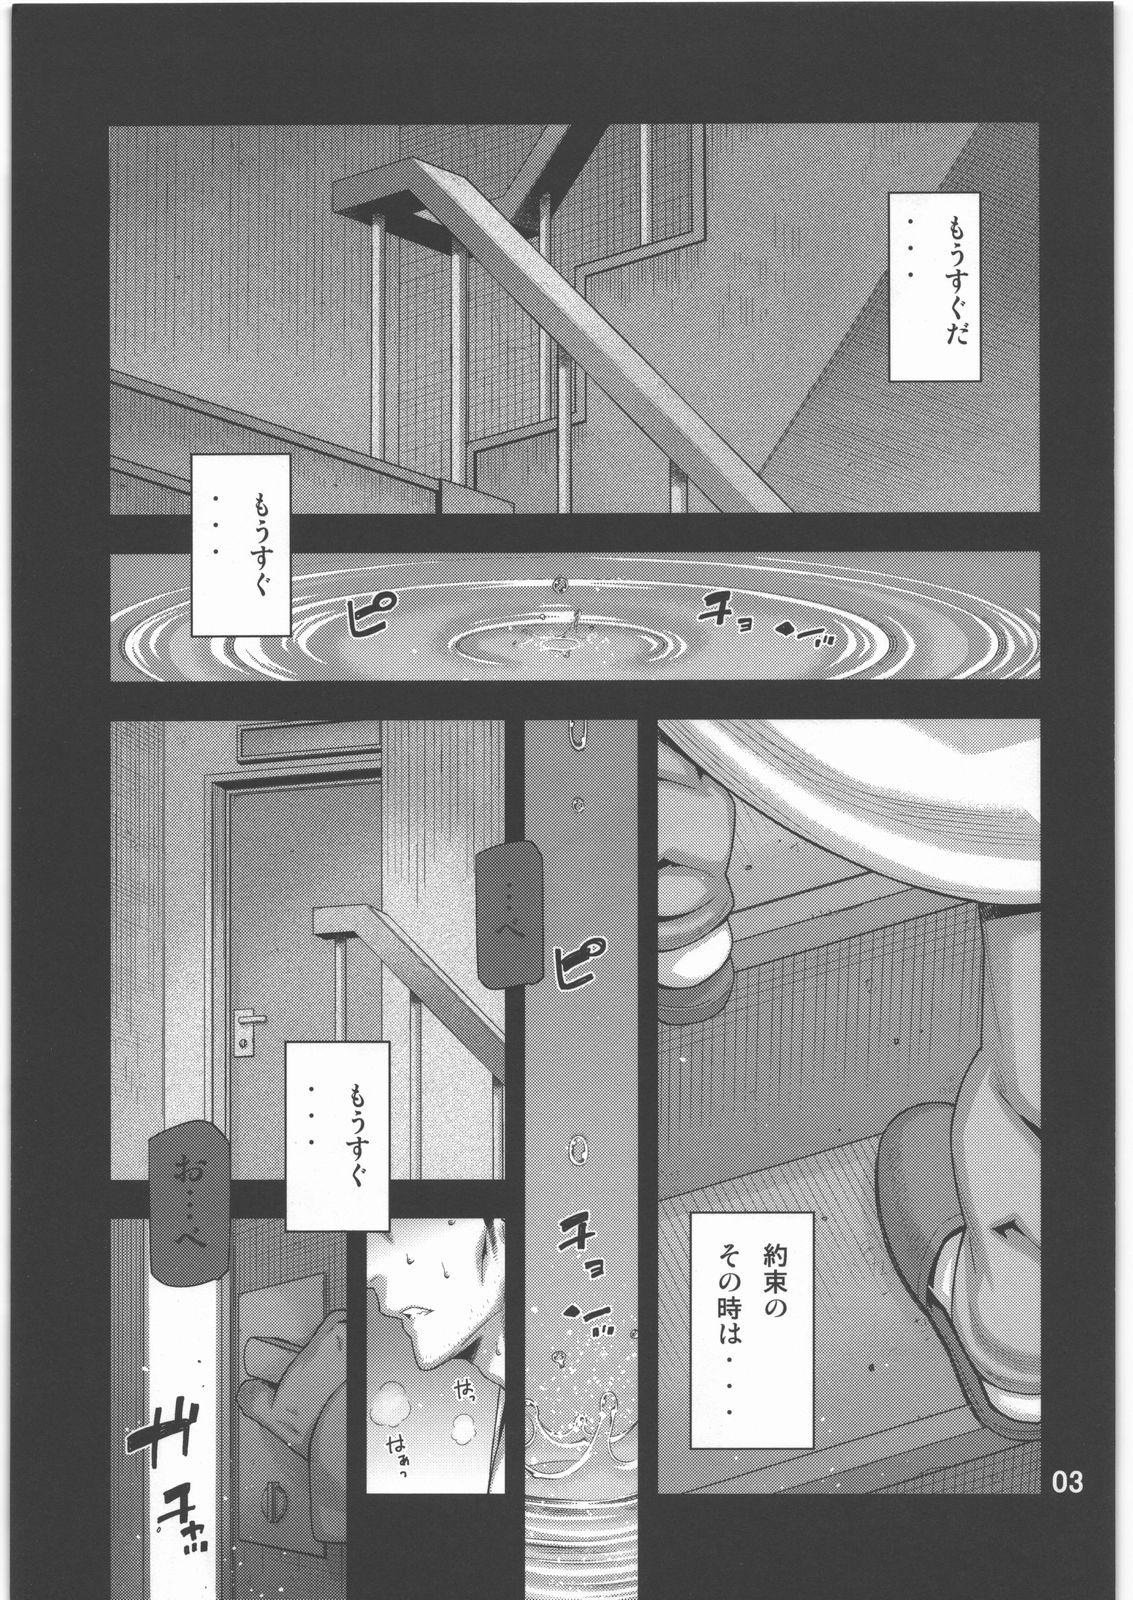 Orgasms FORGET ME NOT - Steinsgate Gostoso - Page 2